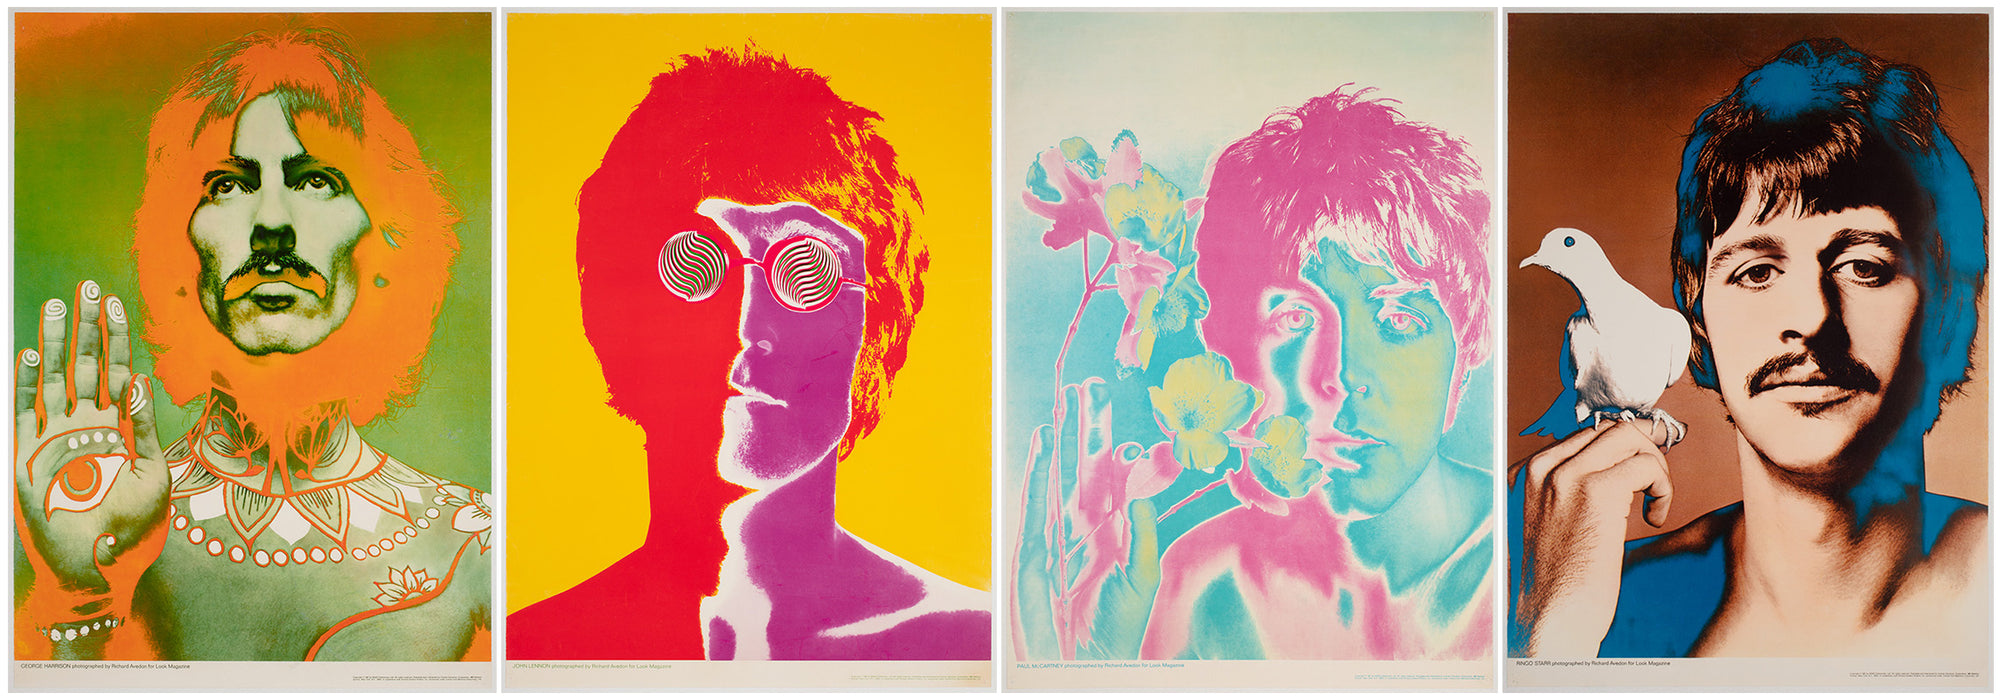 60 Years of the Beatles - Vintage Avedon Psychedelic Prints